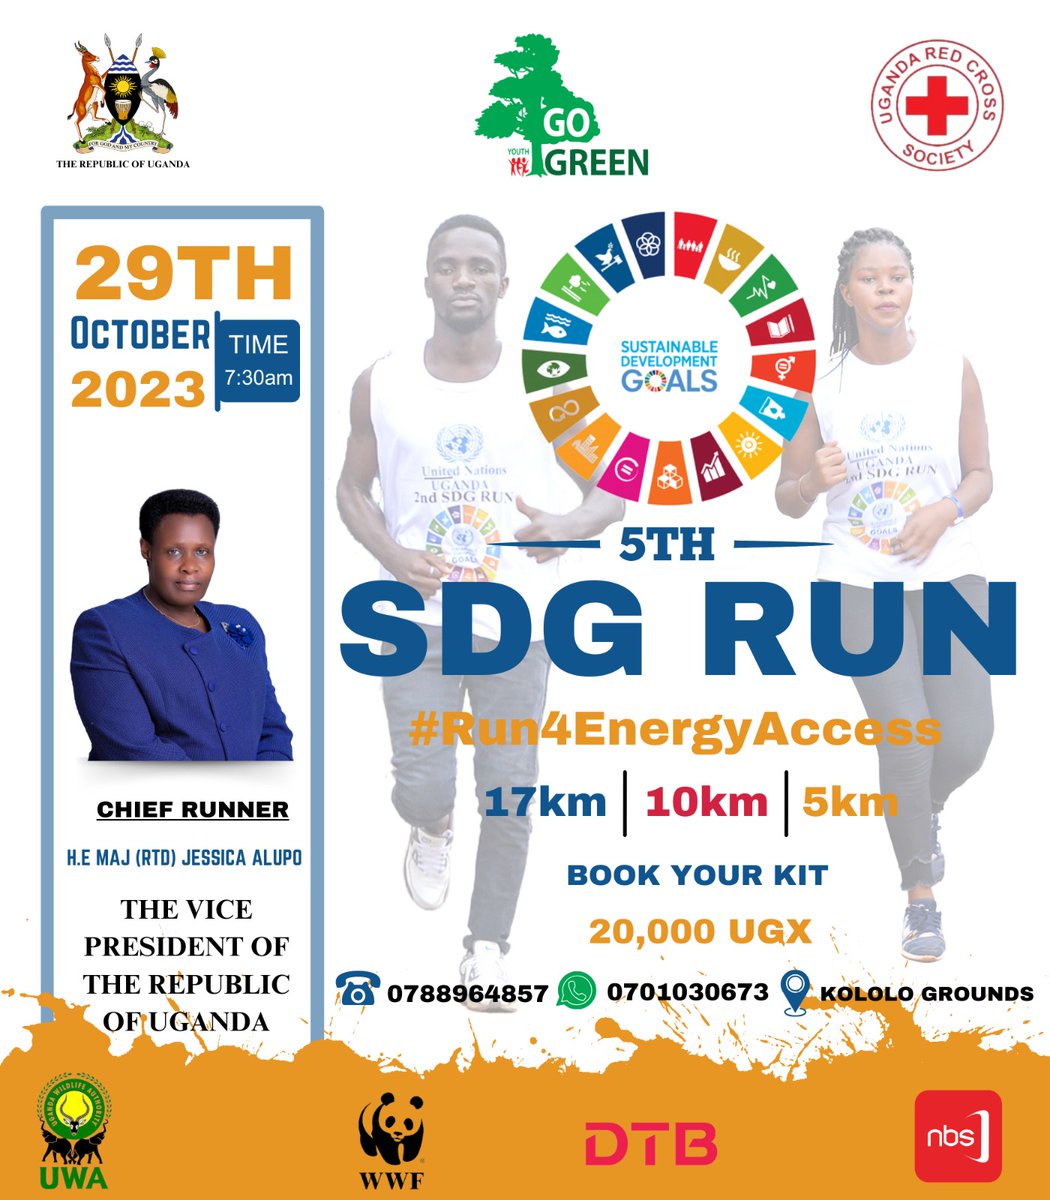 Hello Uganda! 
All SDG Champions, Youth, students, CSOs, Private sector, NGOs, Media, Climate Activists, Energy Companies, UN Agencies, Government, the #5thSDGRUN Registration Link is out! Please register and be part of the #Run4EnergyAccess on 29.10.23
 mobile-webview.gmail.com/-138392607/blo…